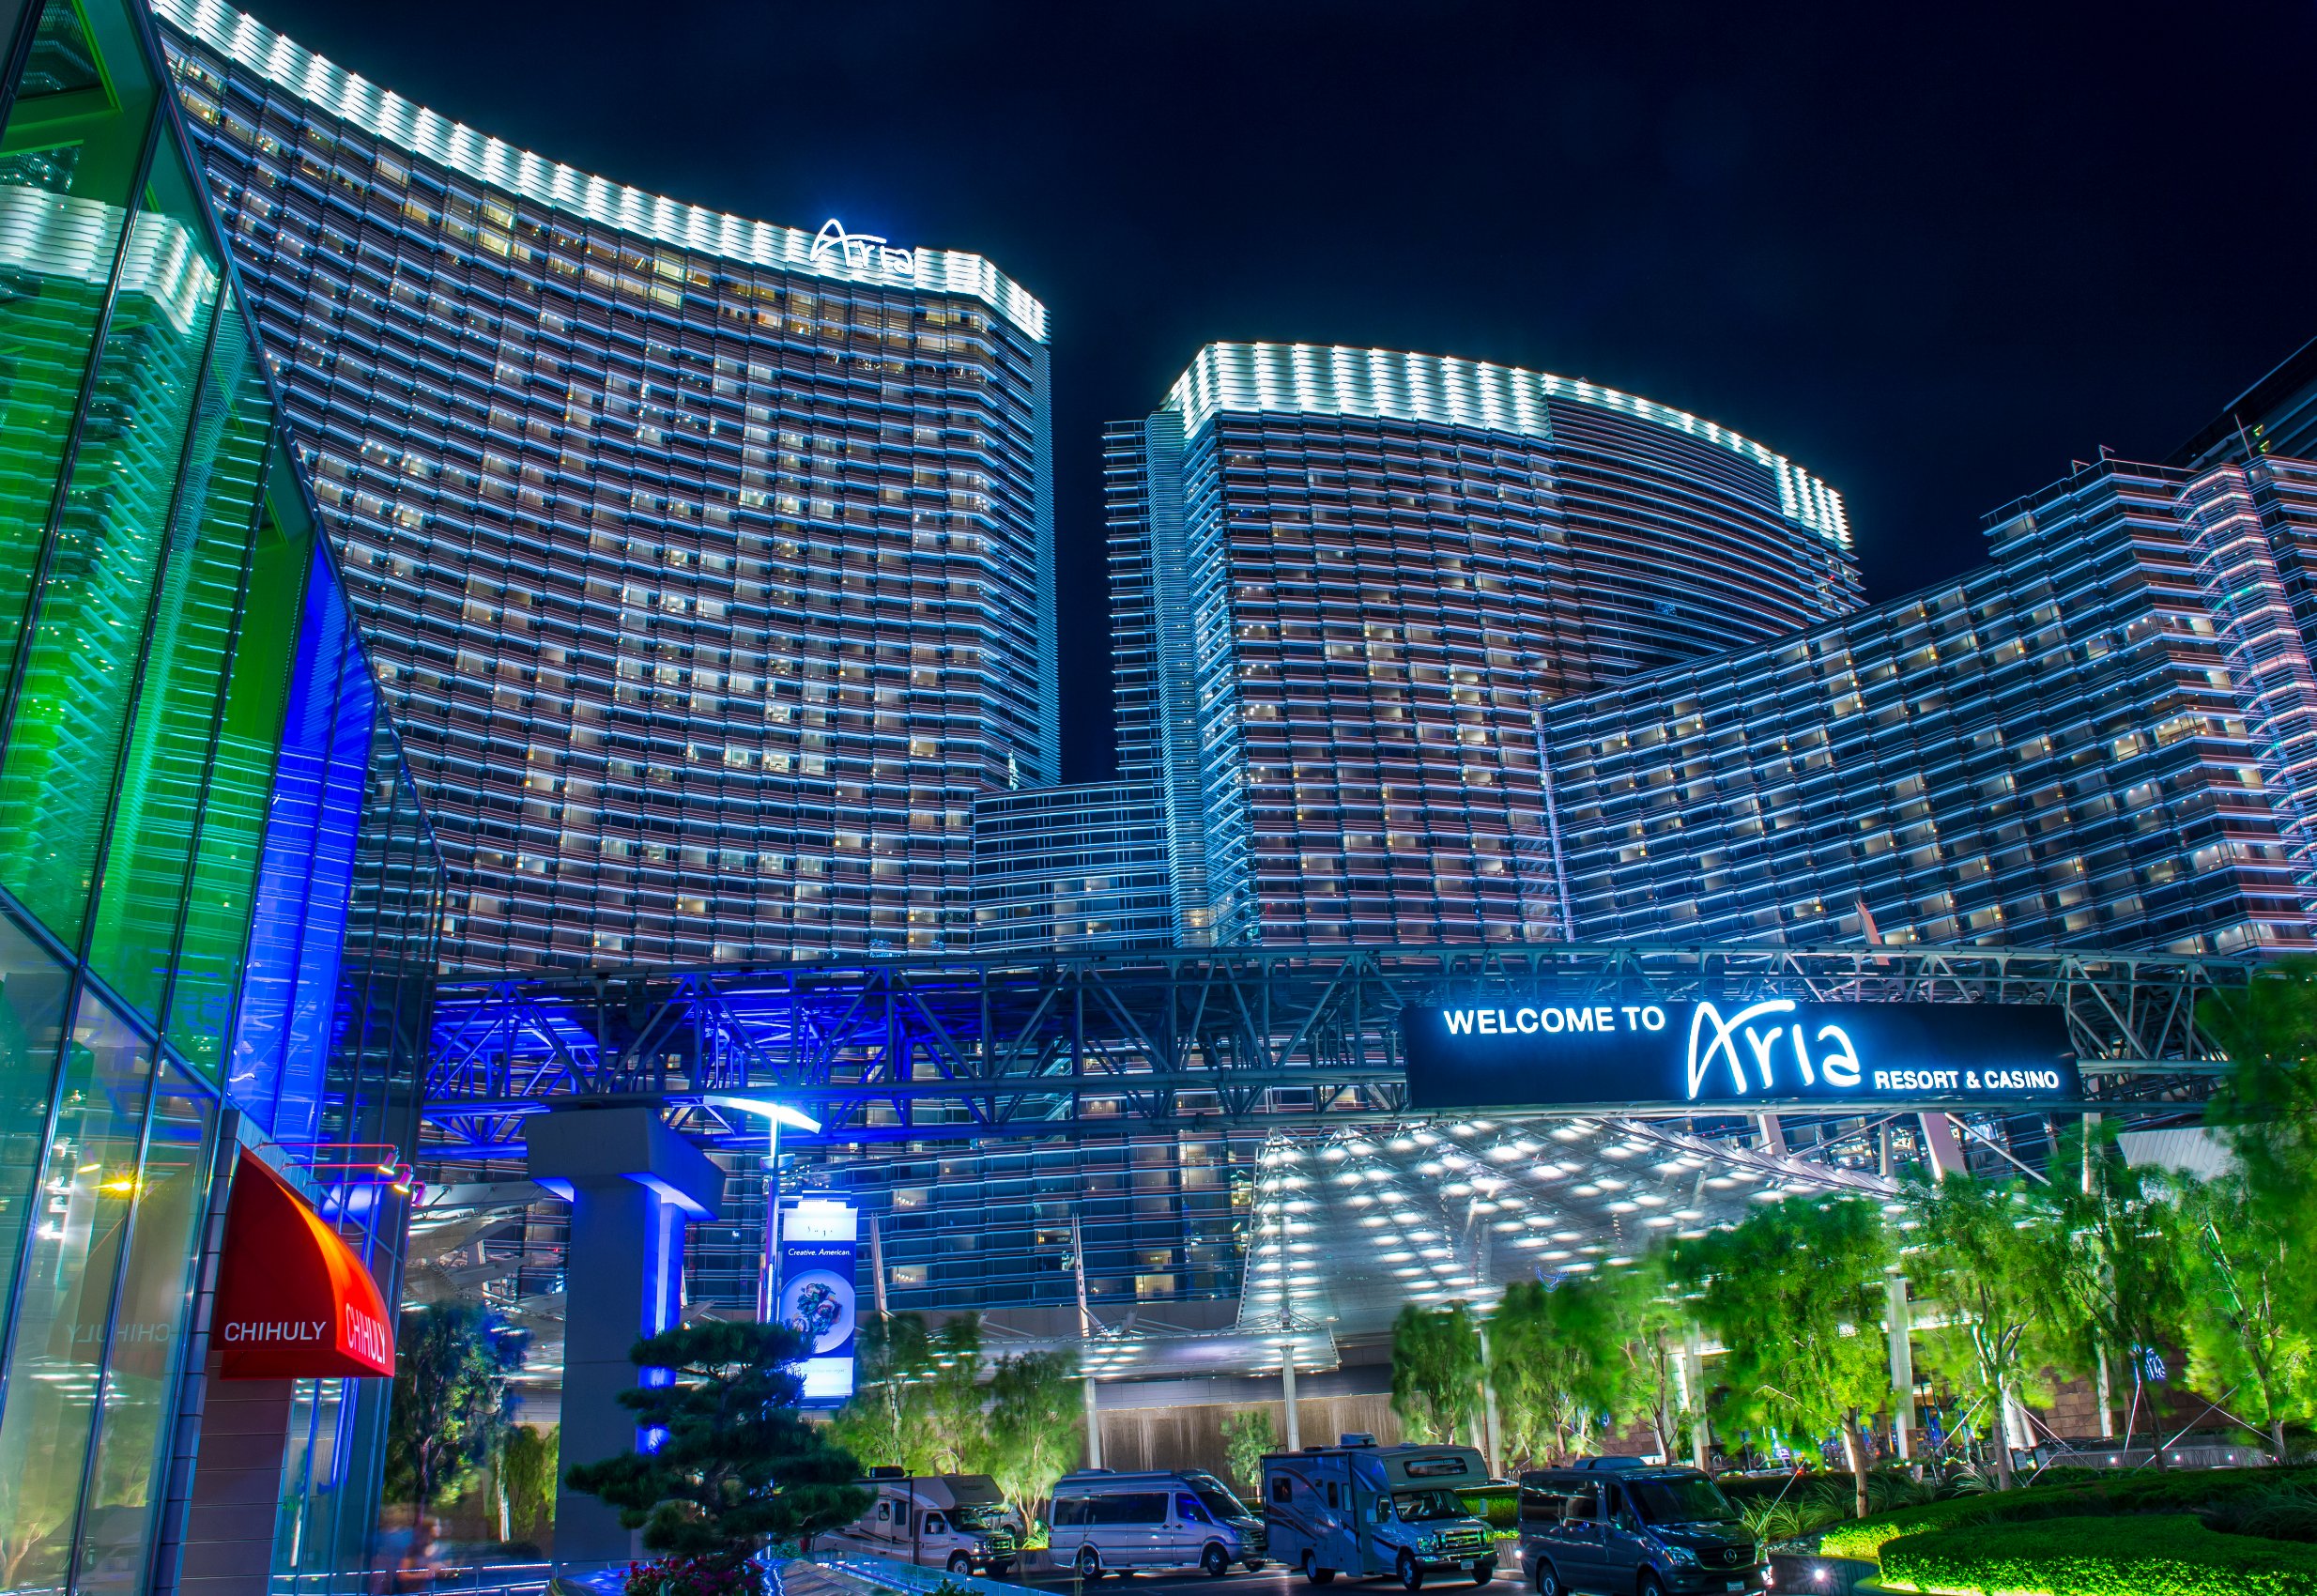 Aria's exterior at night, with many guestrooms illuminated